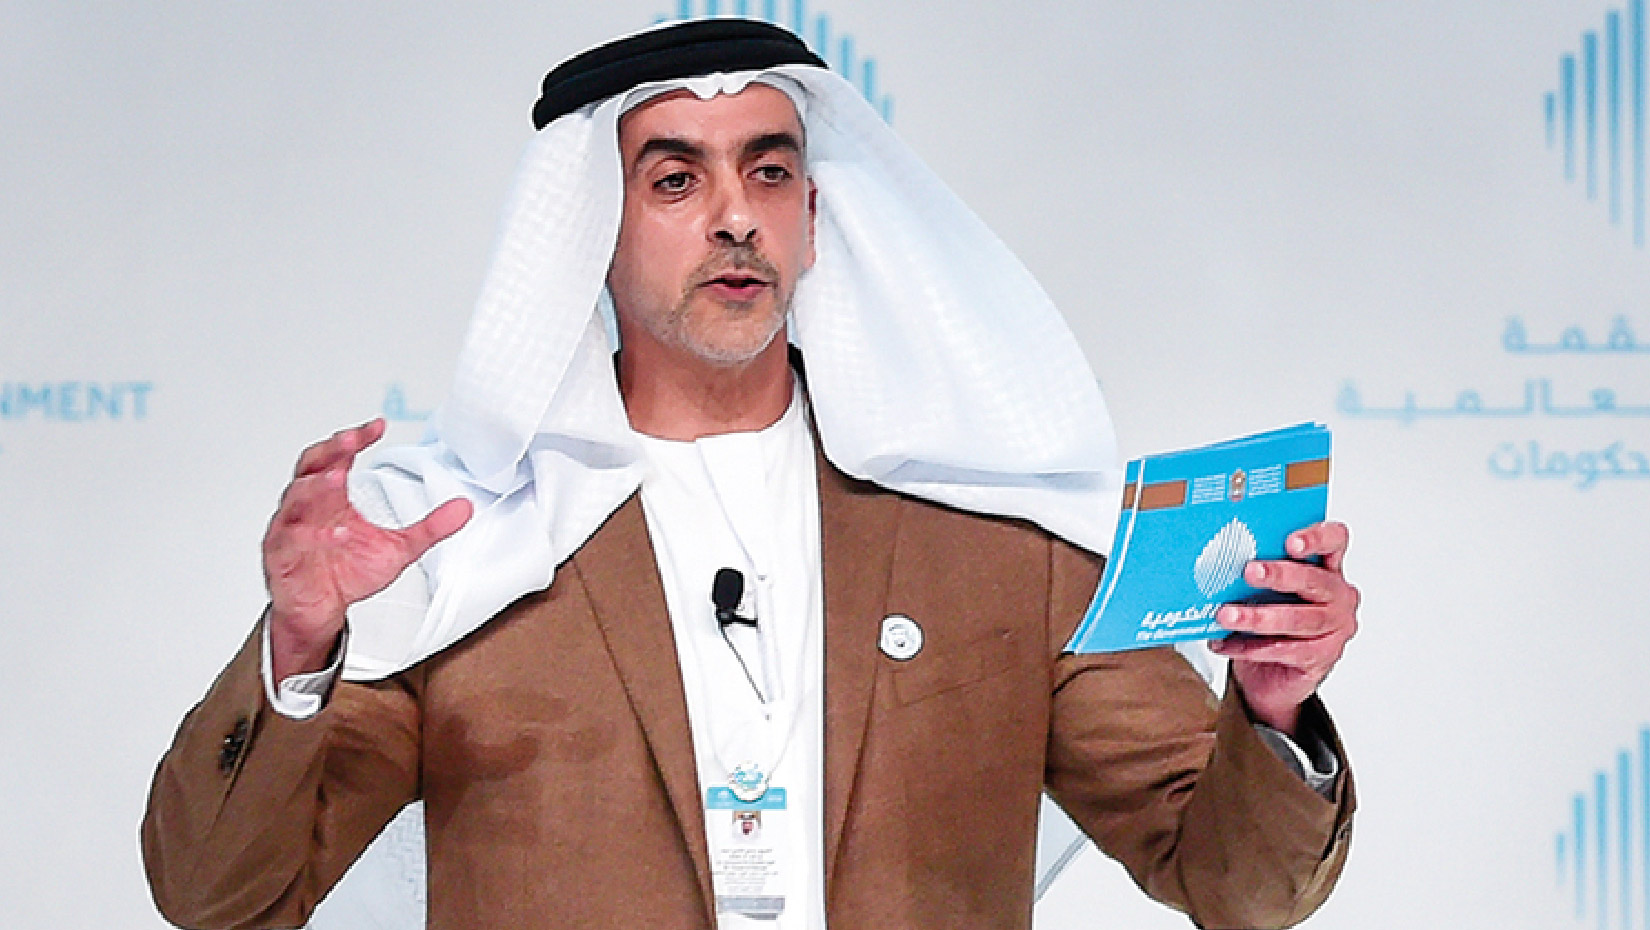 World Government Summit: Story platform named Zayed the Inspirer is launched